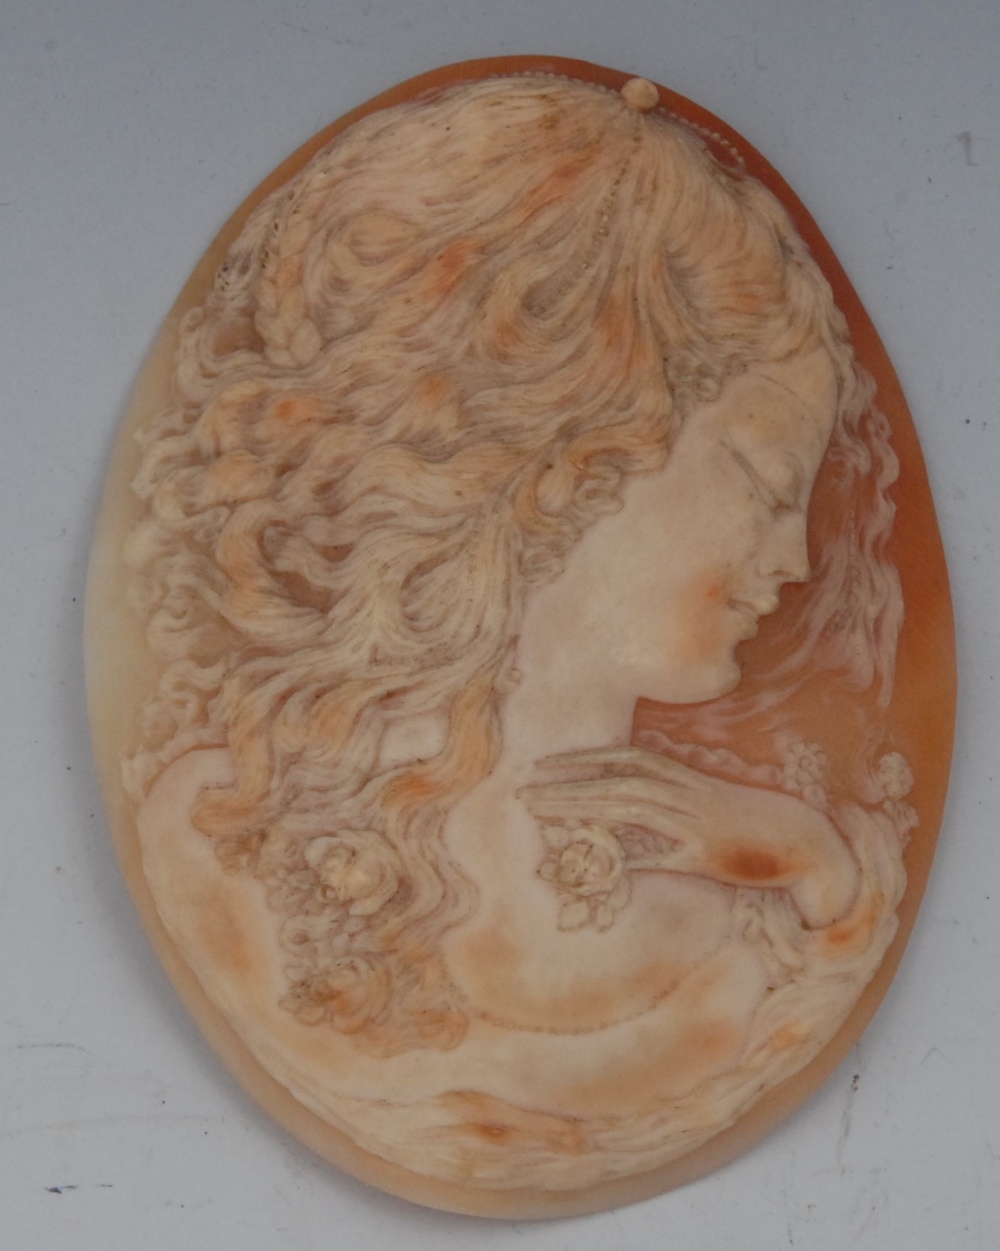 A large 19th century oval portrait cameo panel, carved with a flowing haired maiden facing right